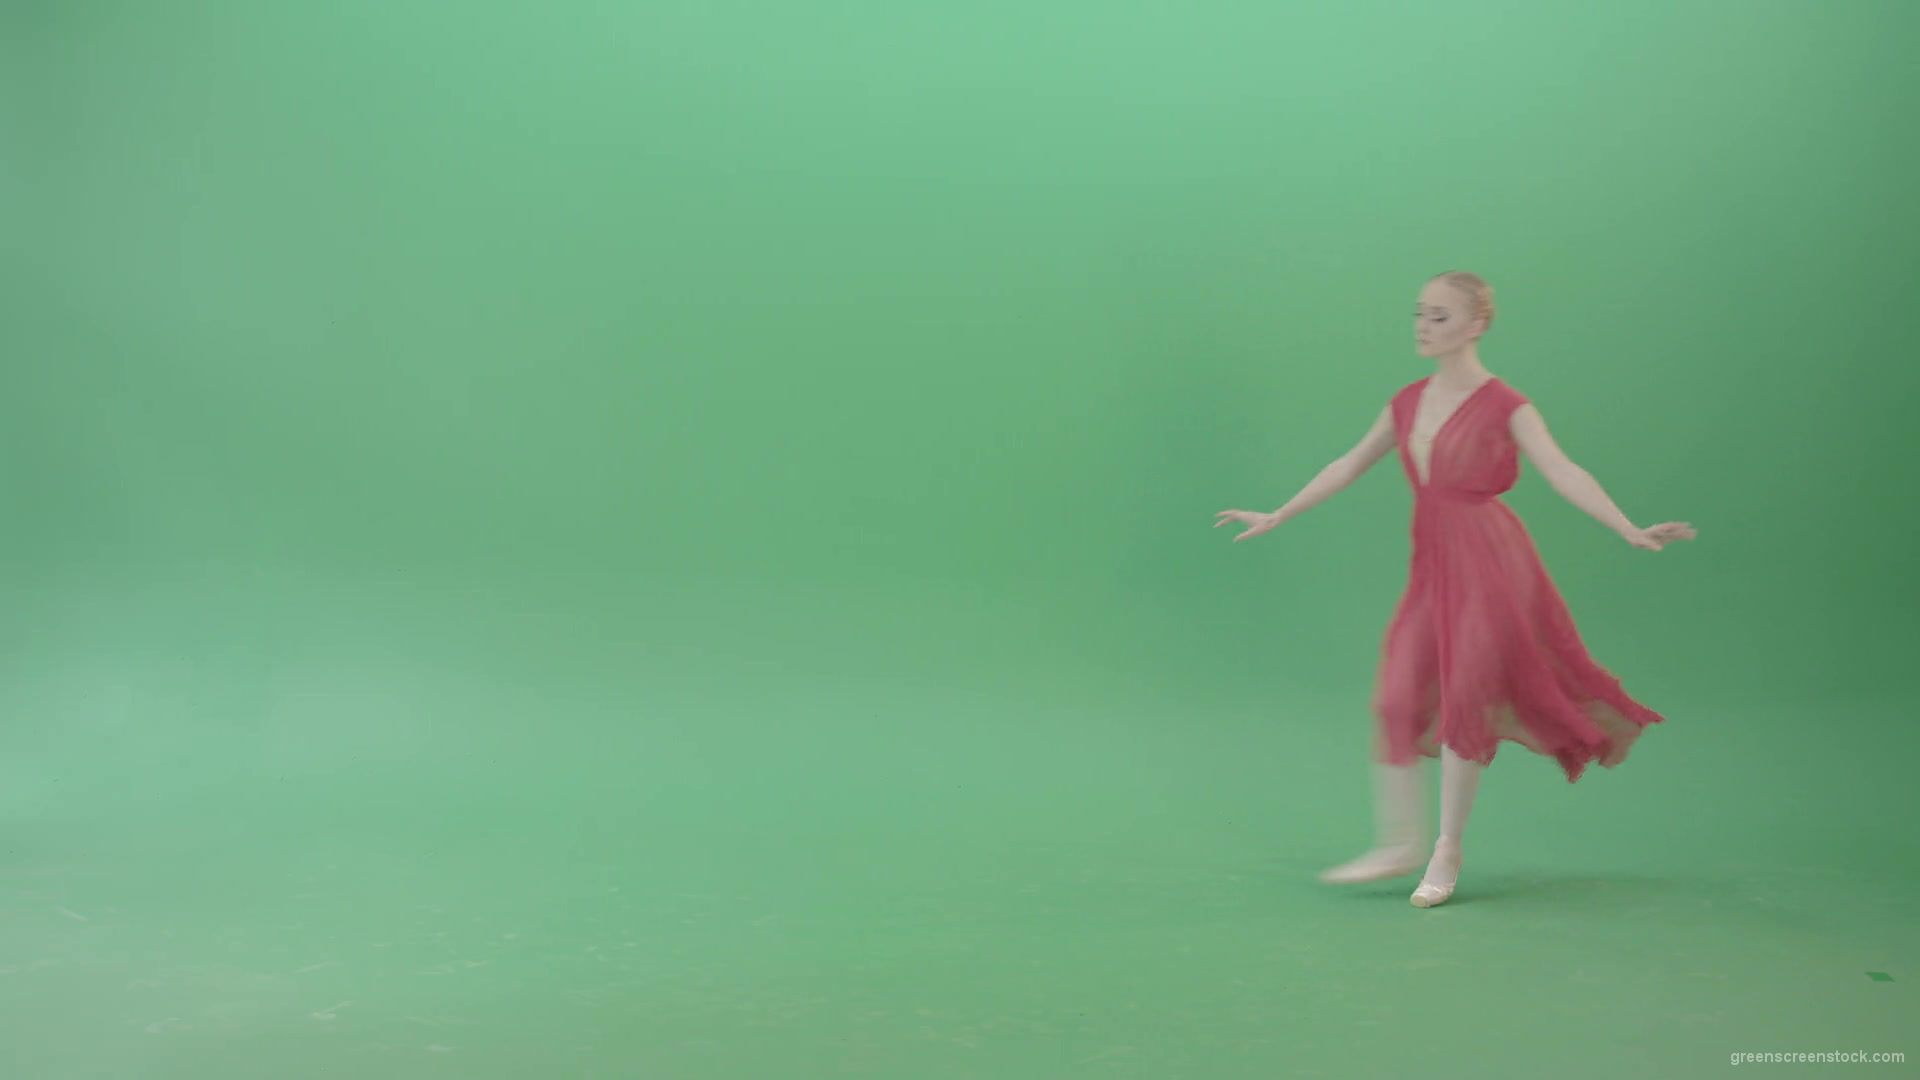 Blonde-girl-in-red-dress-dancing-classical-ballet-on-green-screen-4K-video-footage-1920_002 Green Screen Stock